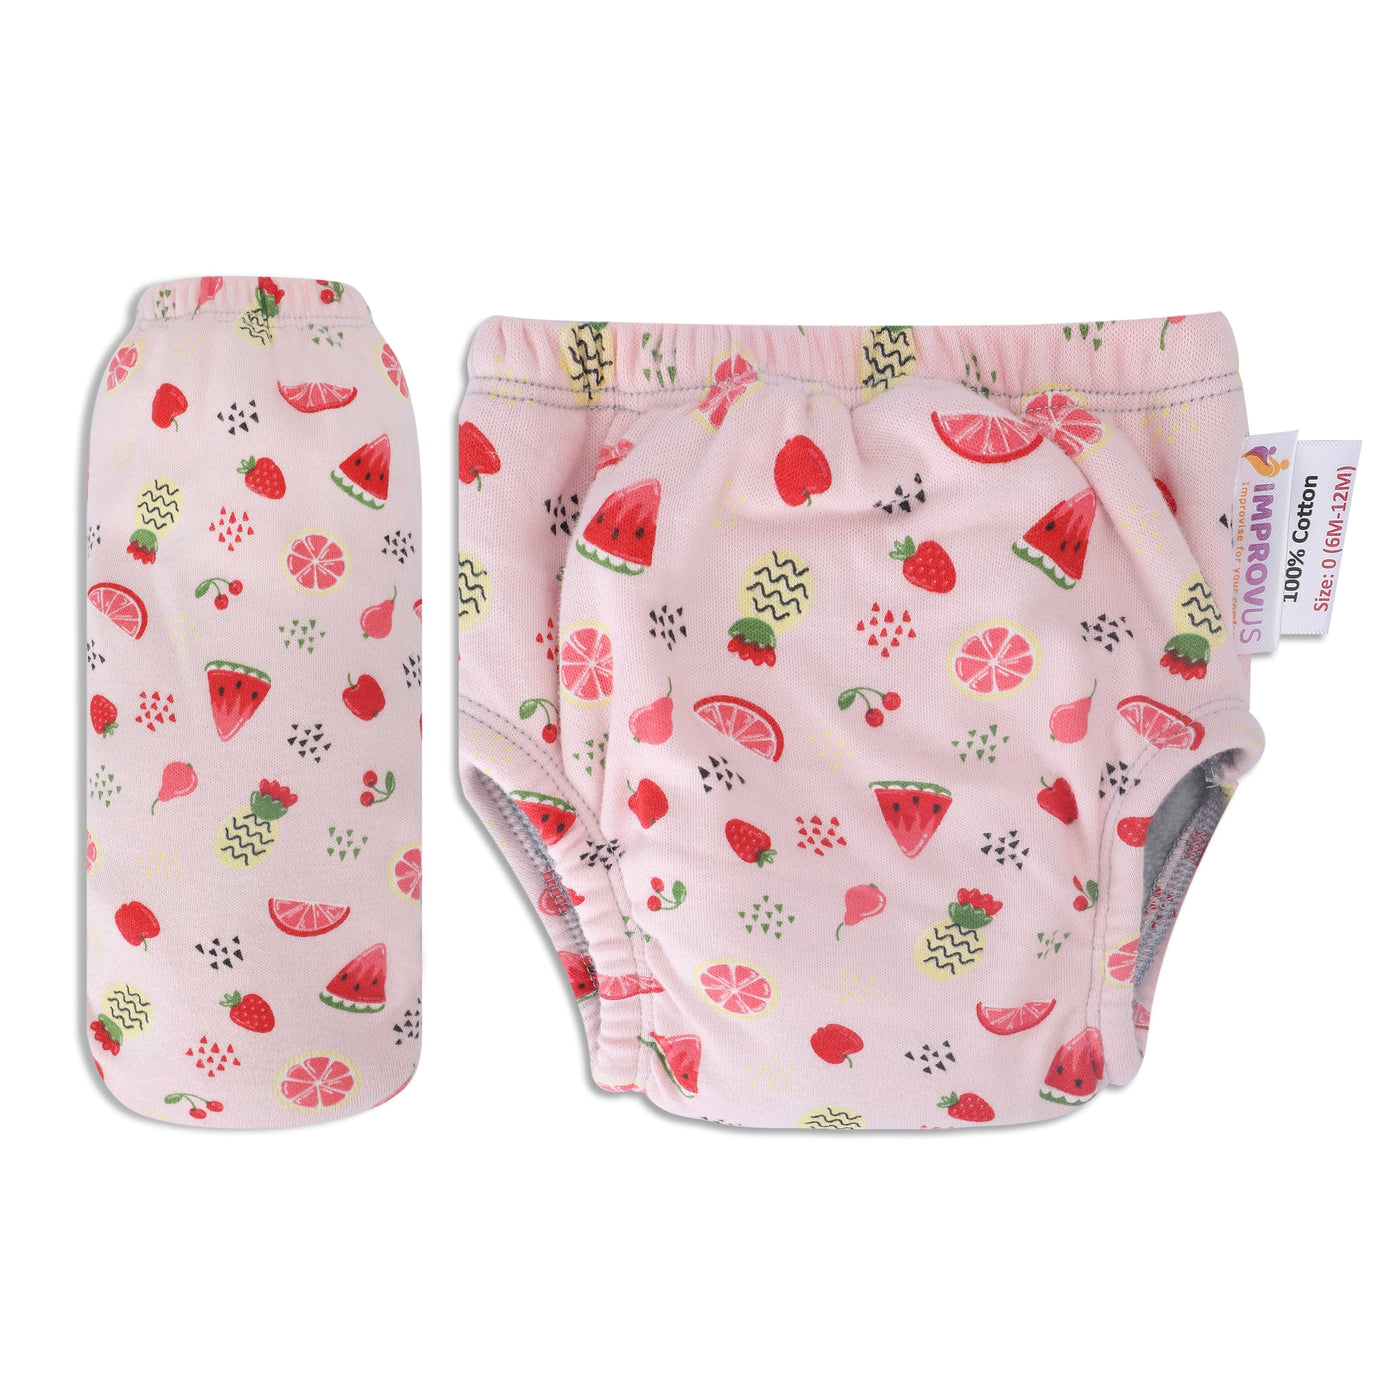 White Padded Underwear for Growing Babies/Toddlers